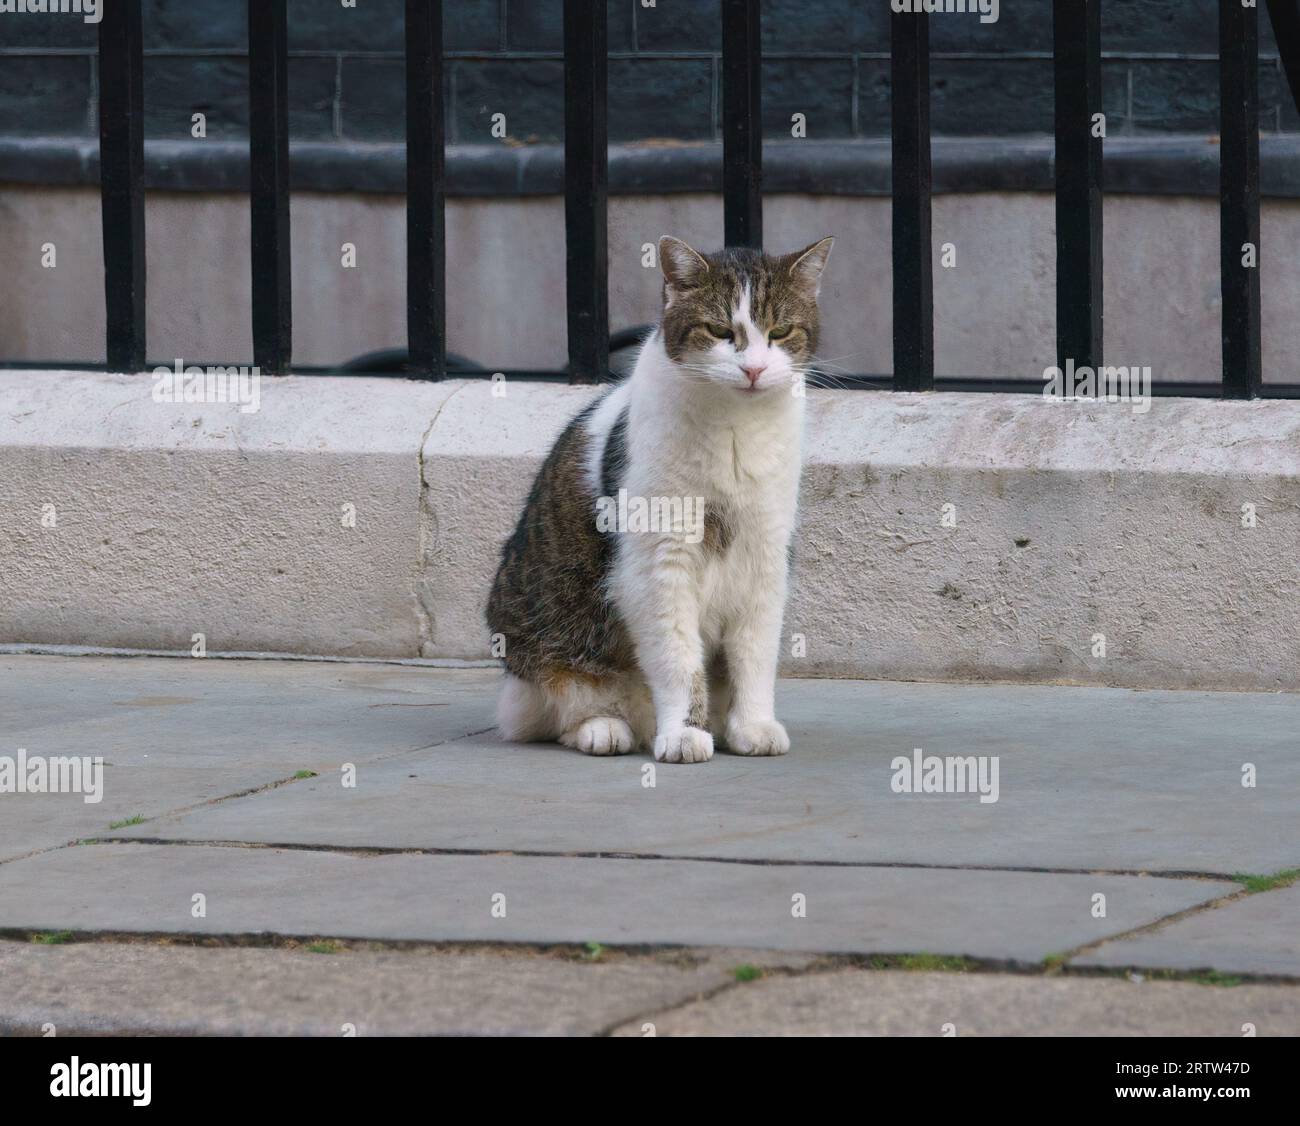 Larry the Cat and Chief Mouser to Downing Street, London, UK, poses for photos, and makes his way across the street. Stock Photo